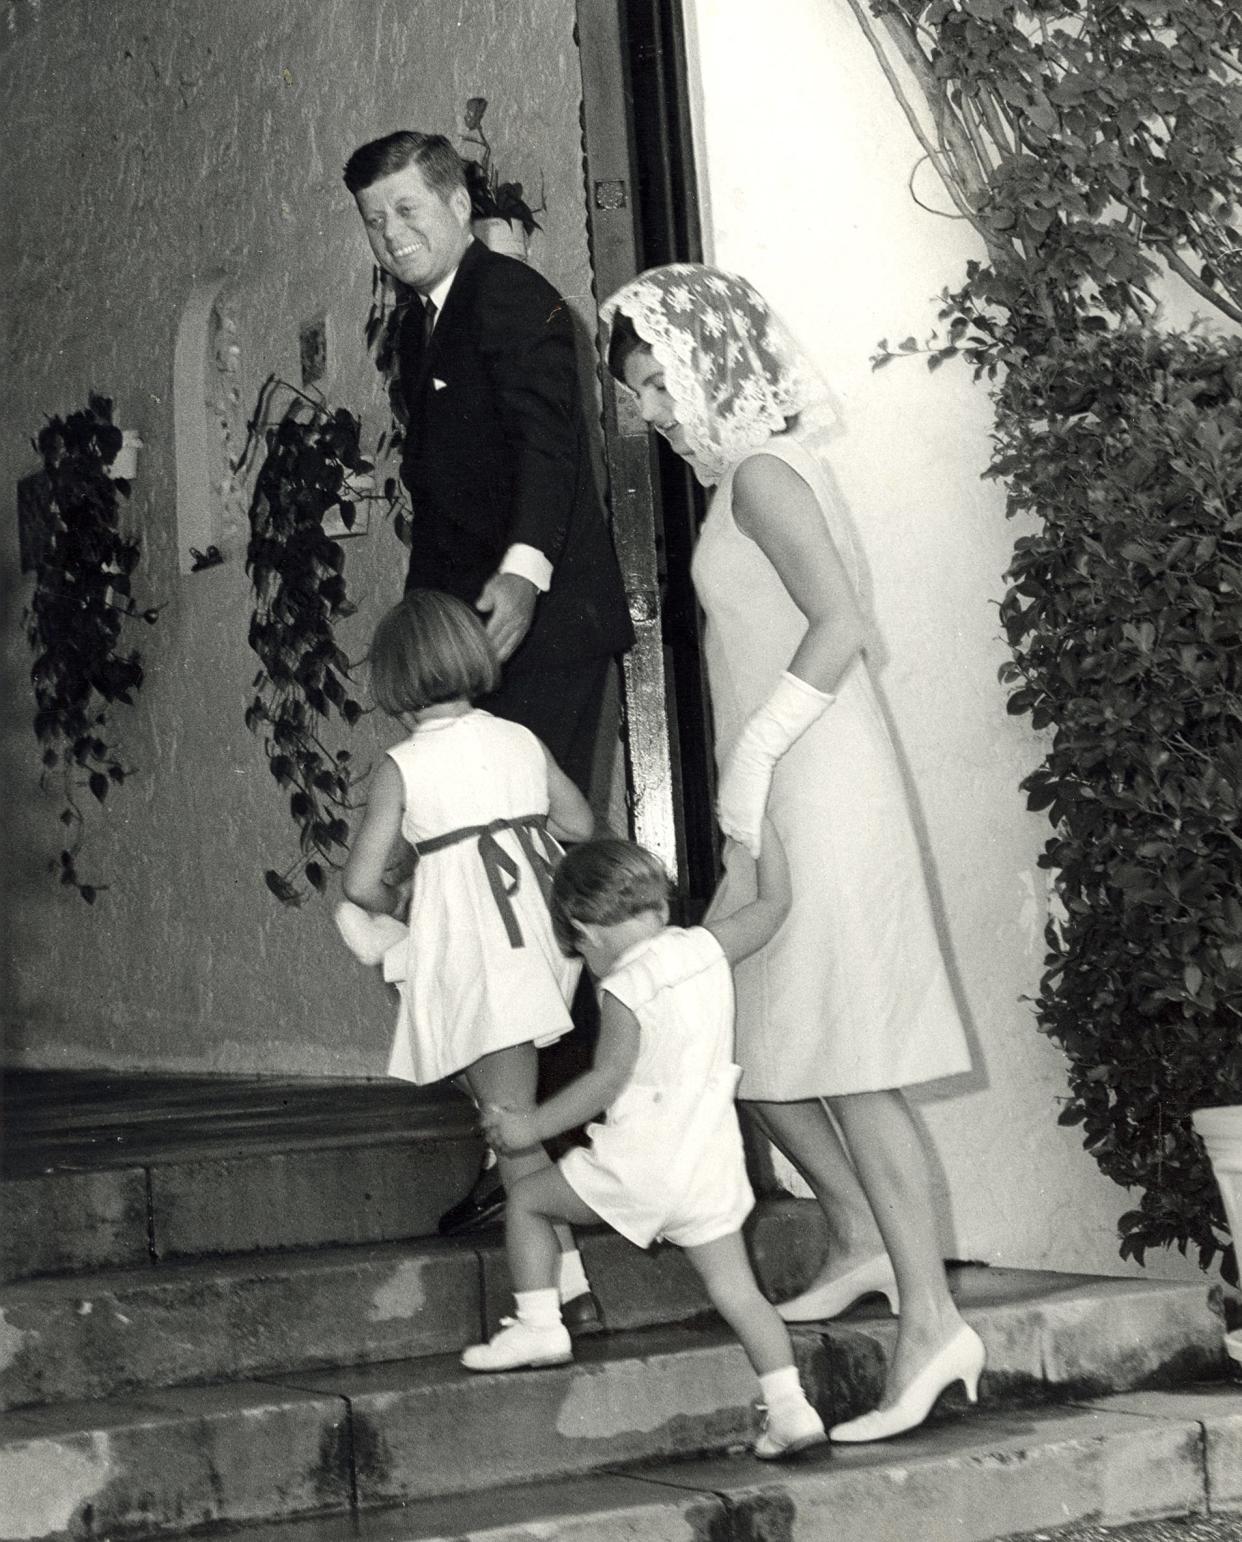 JFK, Jackie and their two young children before Easter Mass at St. Edward Catholic Church in 1963.